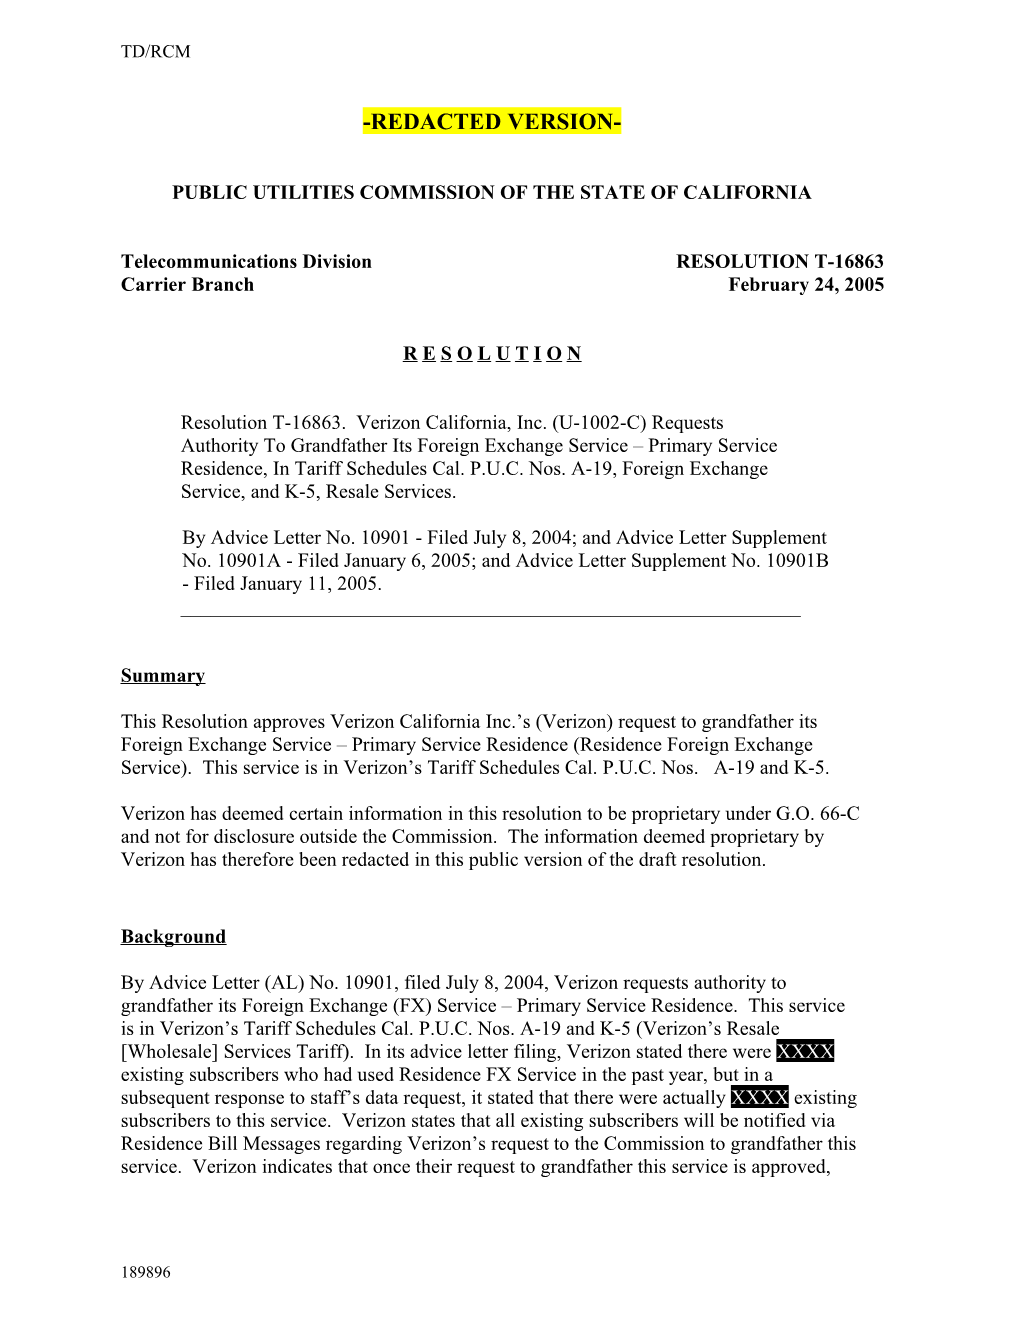 Public Utilities Commission of the State of California s52